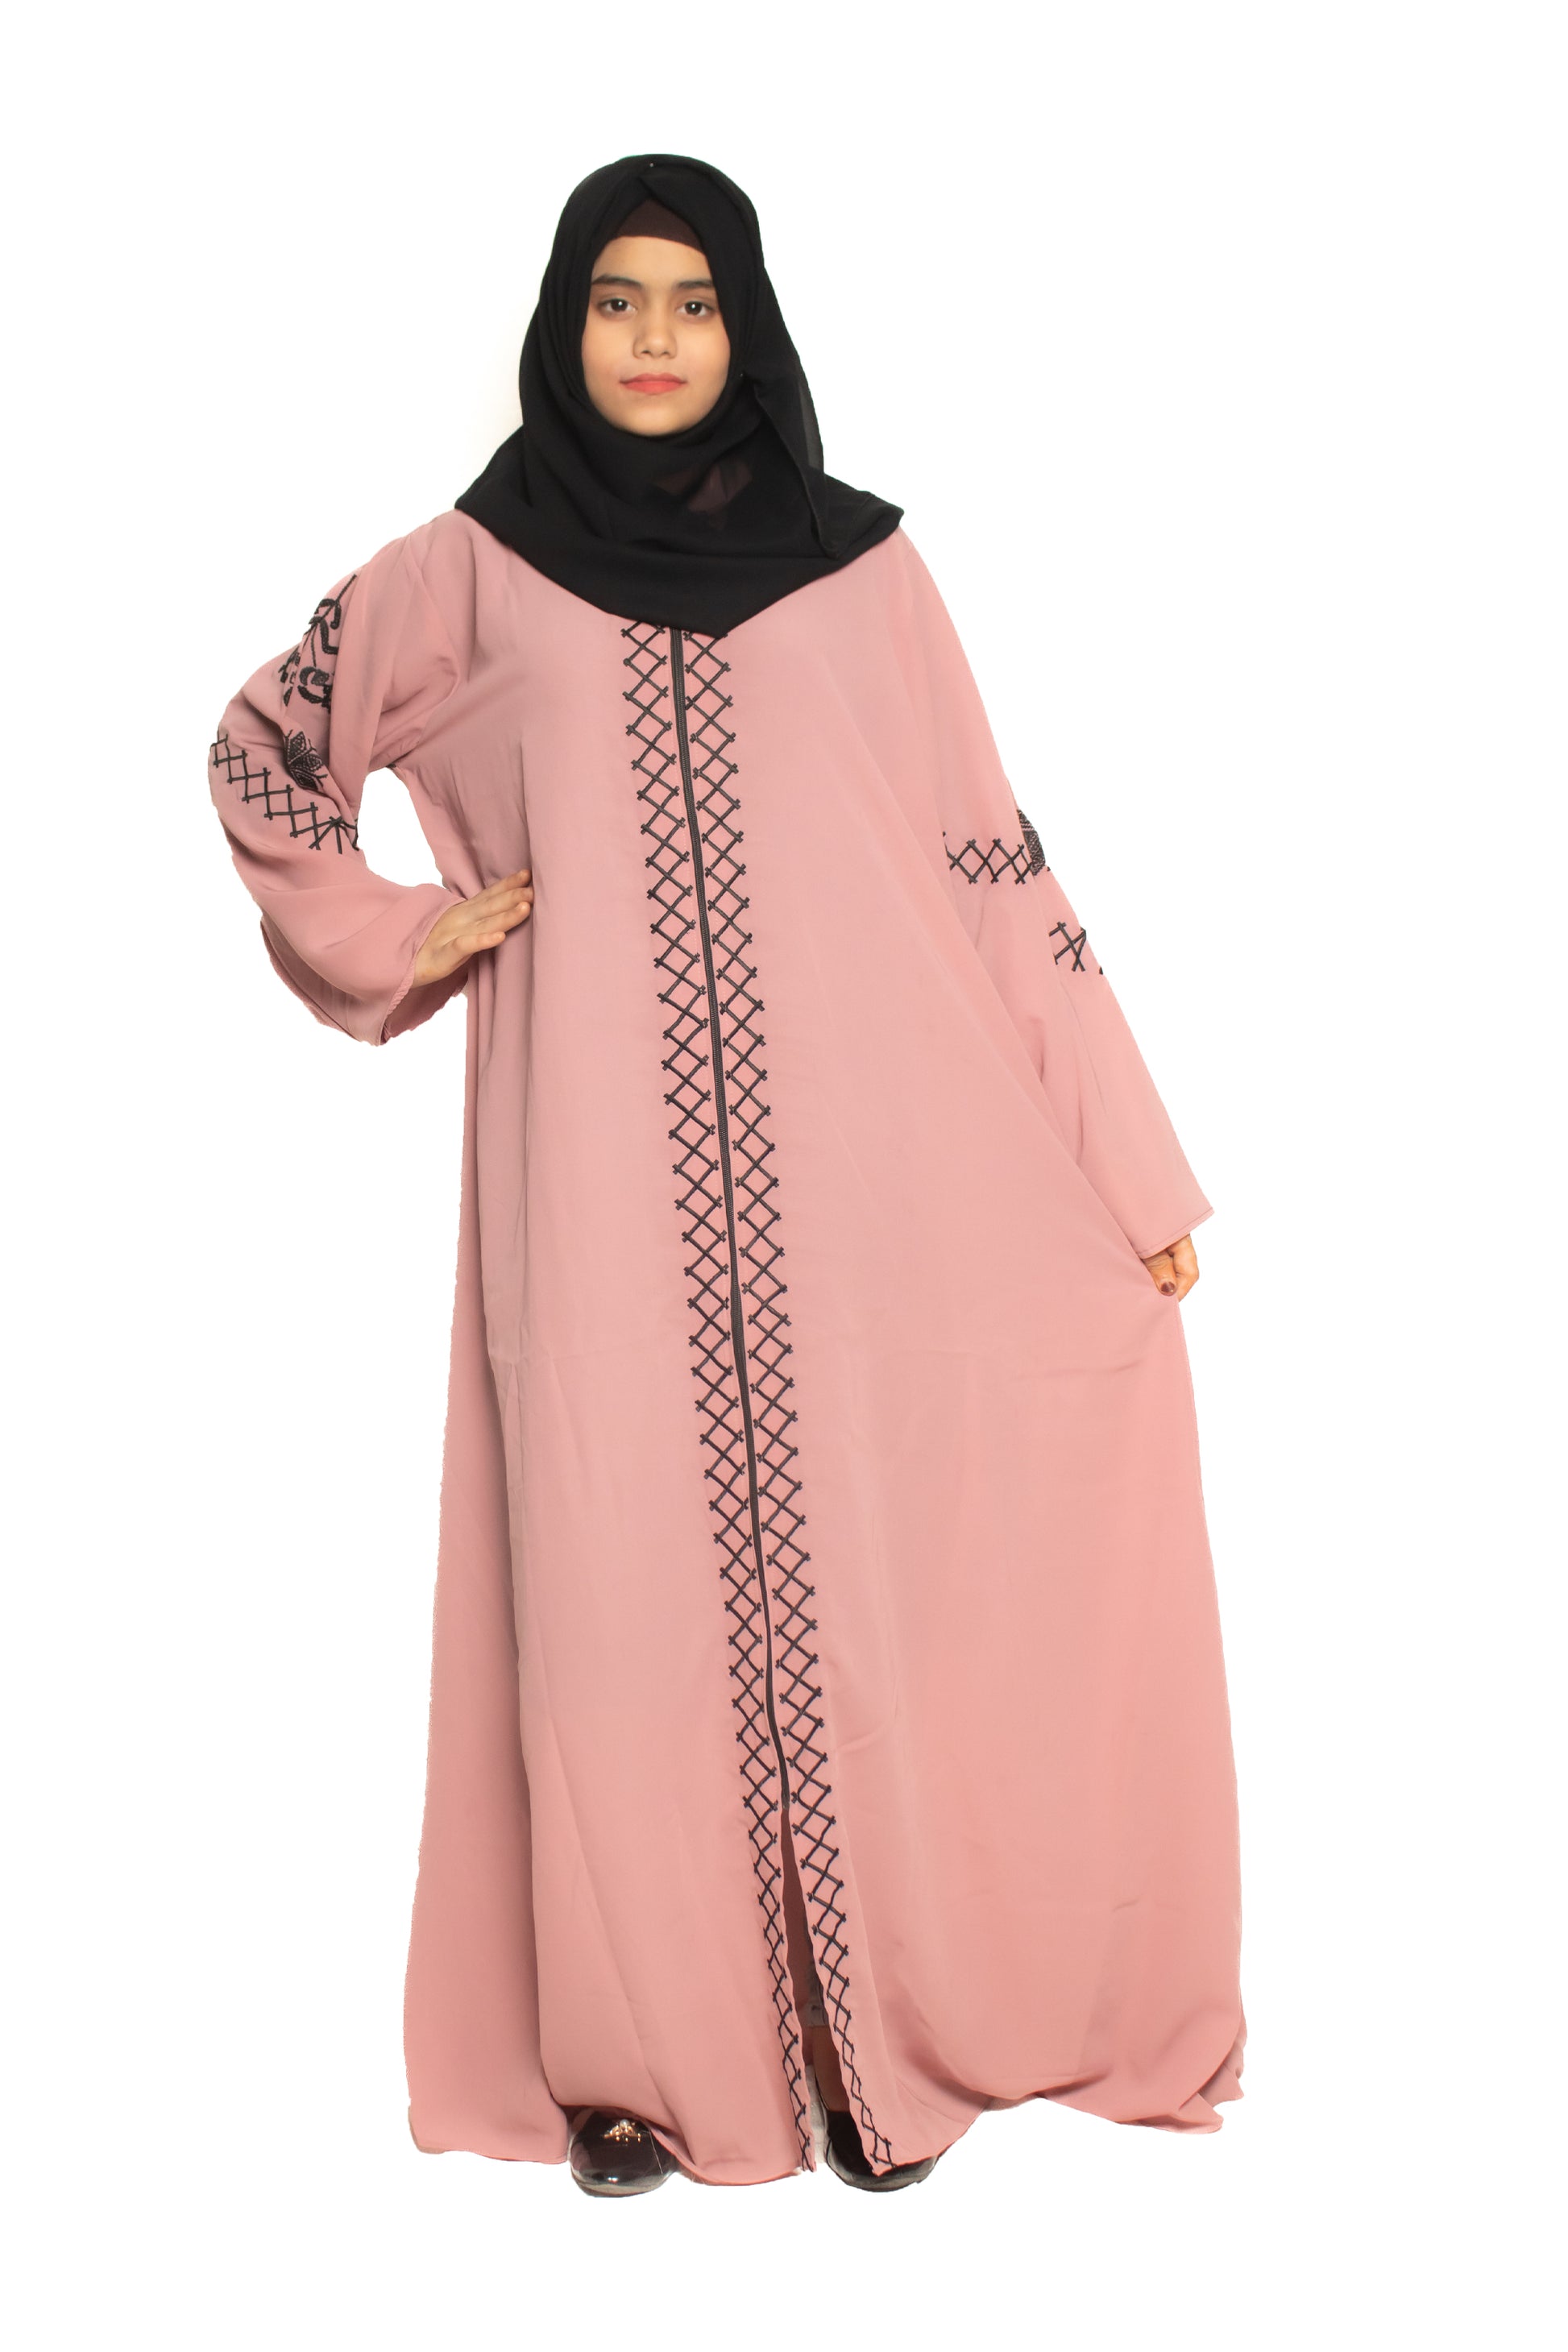 Modest City Self Design Front Open Zip Embroidered Pink Crepe Fabric Abaya or Burqa with Hijab for Women & Girls-Series Laiba